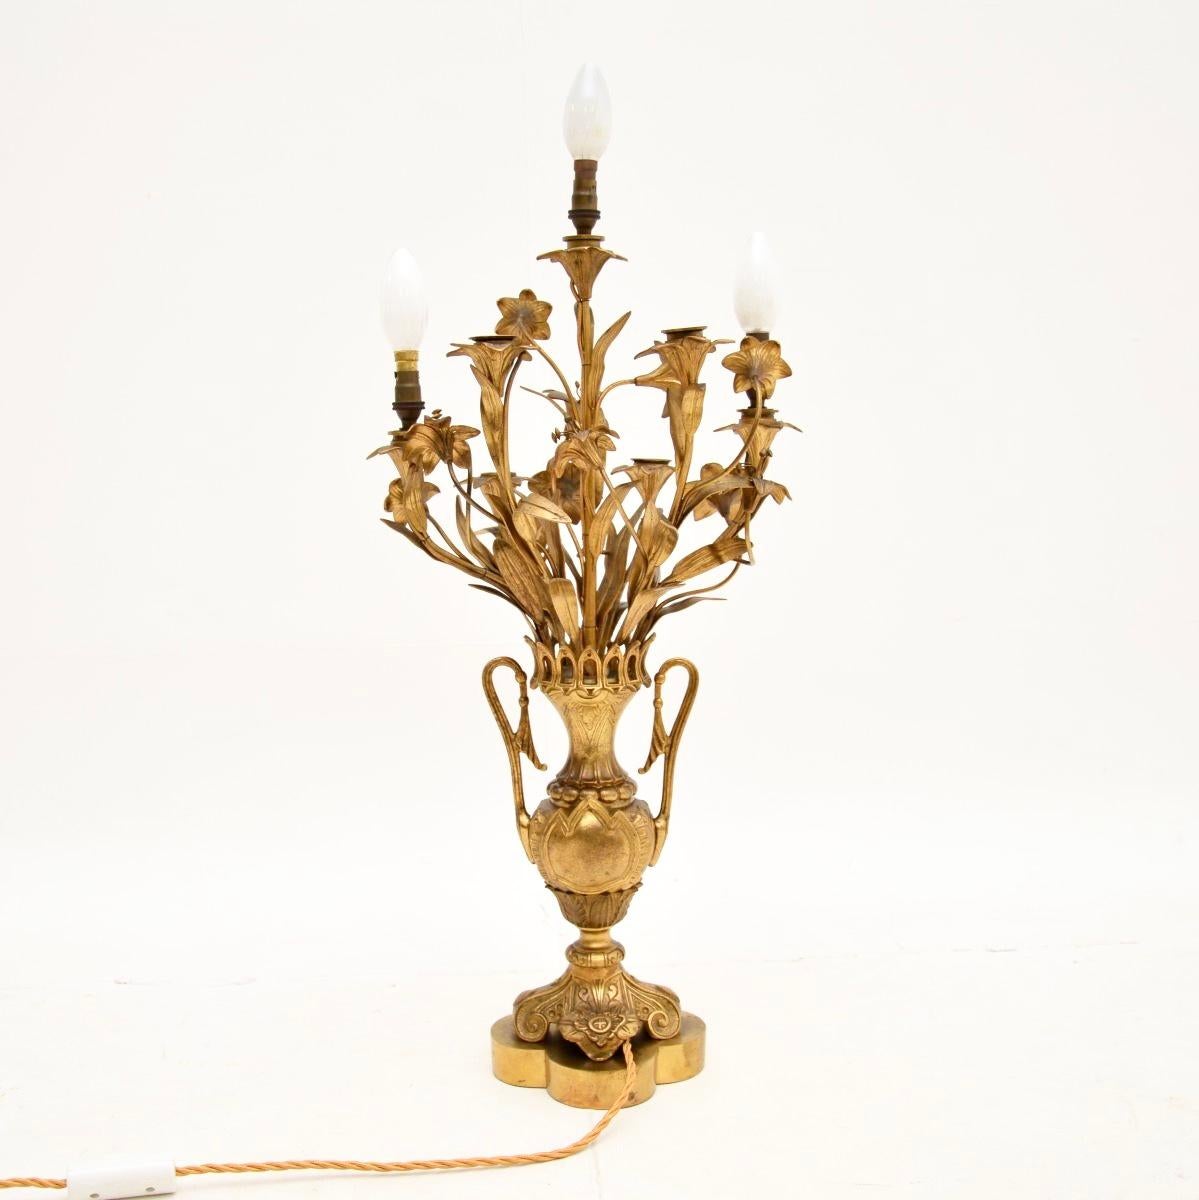 A stunning antique French gilt bronze table lamp. This was made in France, it dates from around the 1900-1910 period.

It is of extremely fine quality, it is very heavy and well made. There are beautiful details on the urn shaped base, the upper